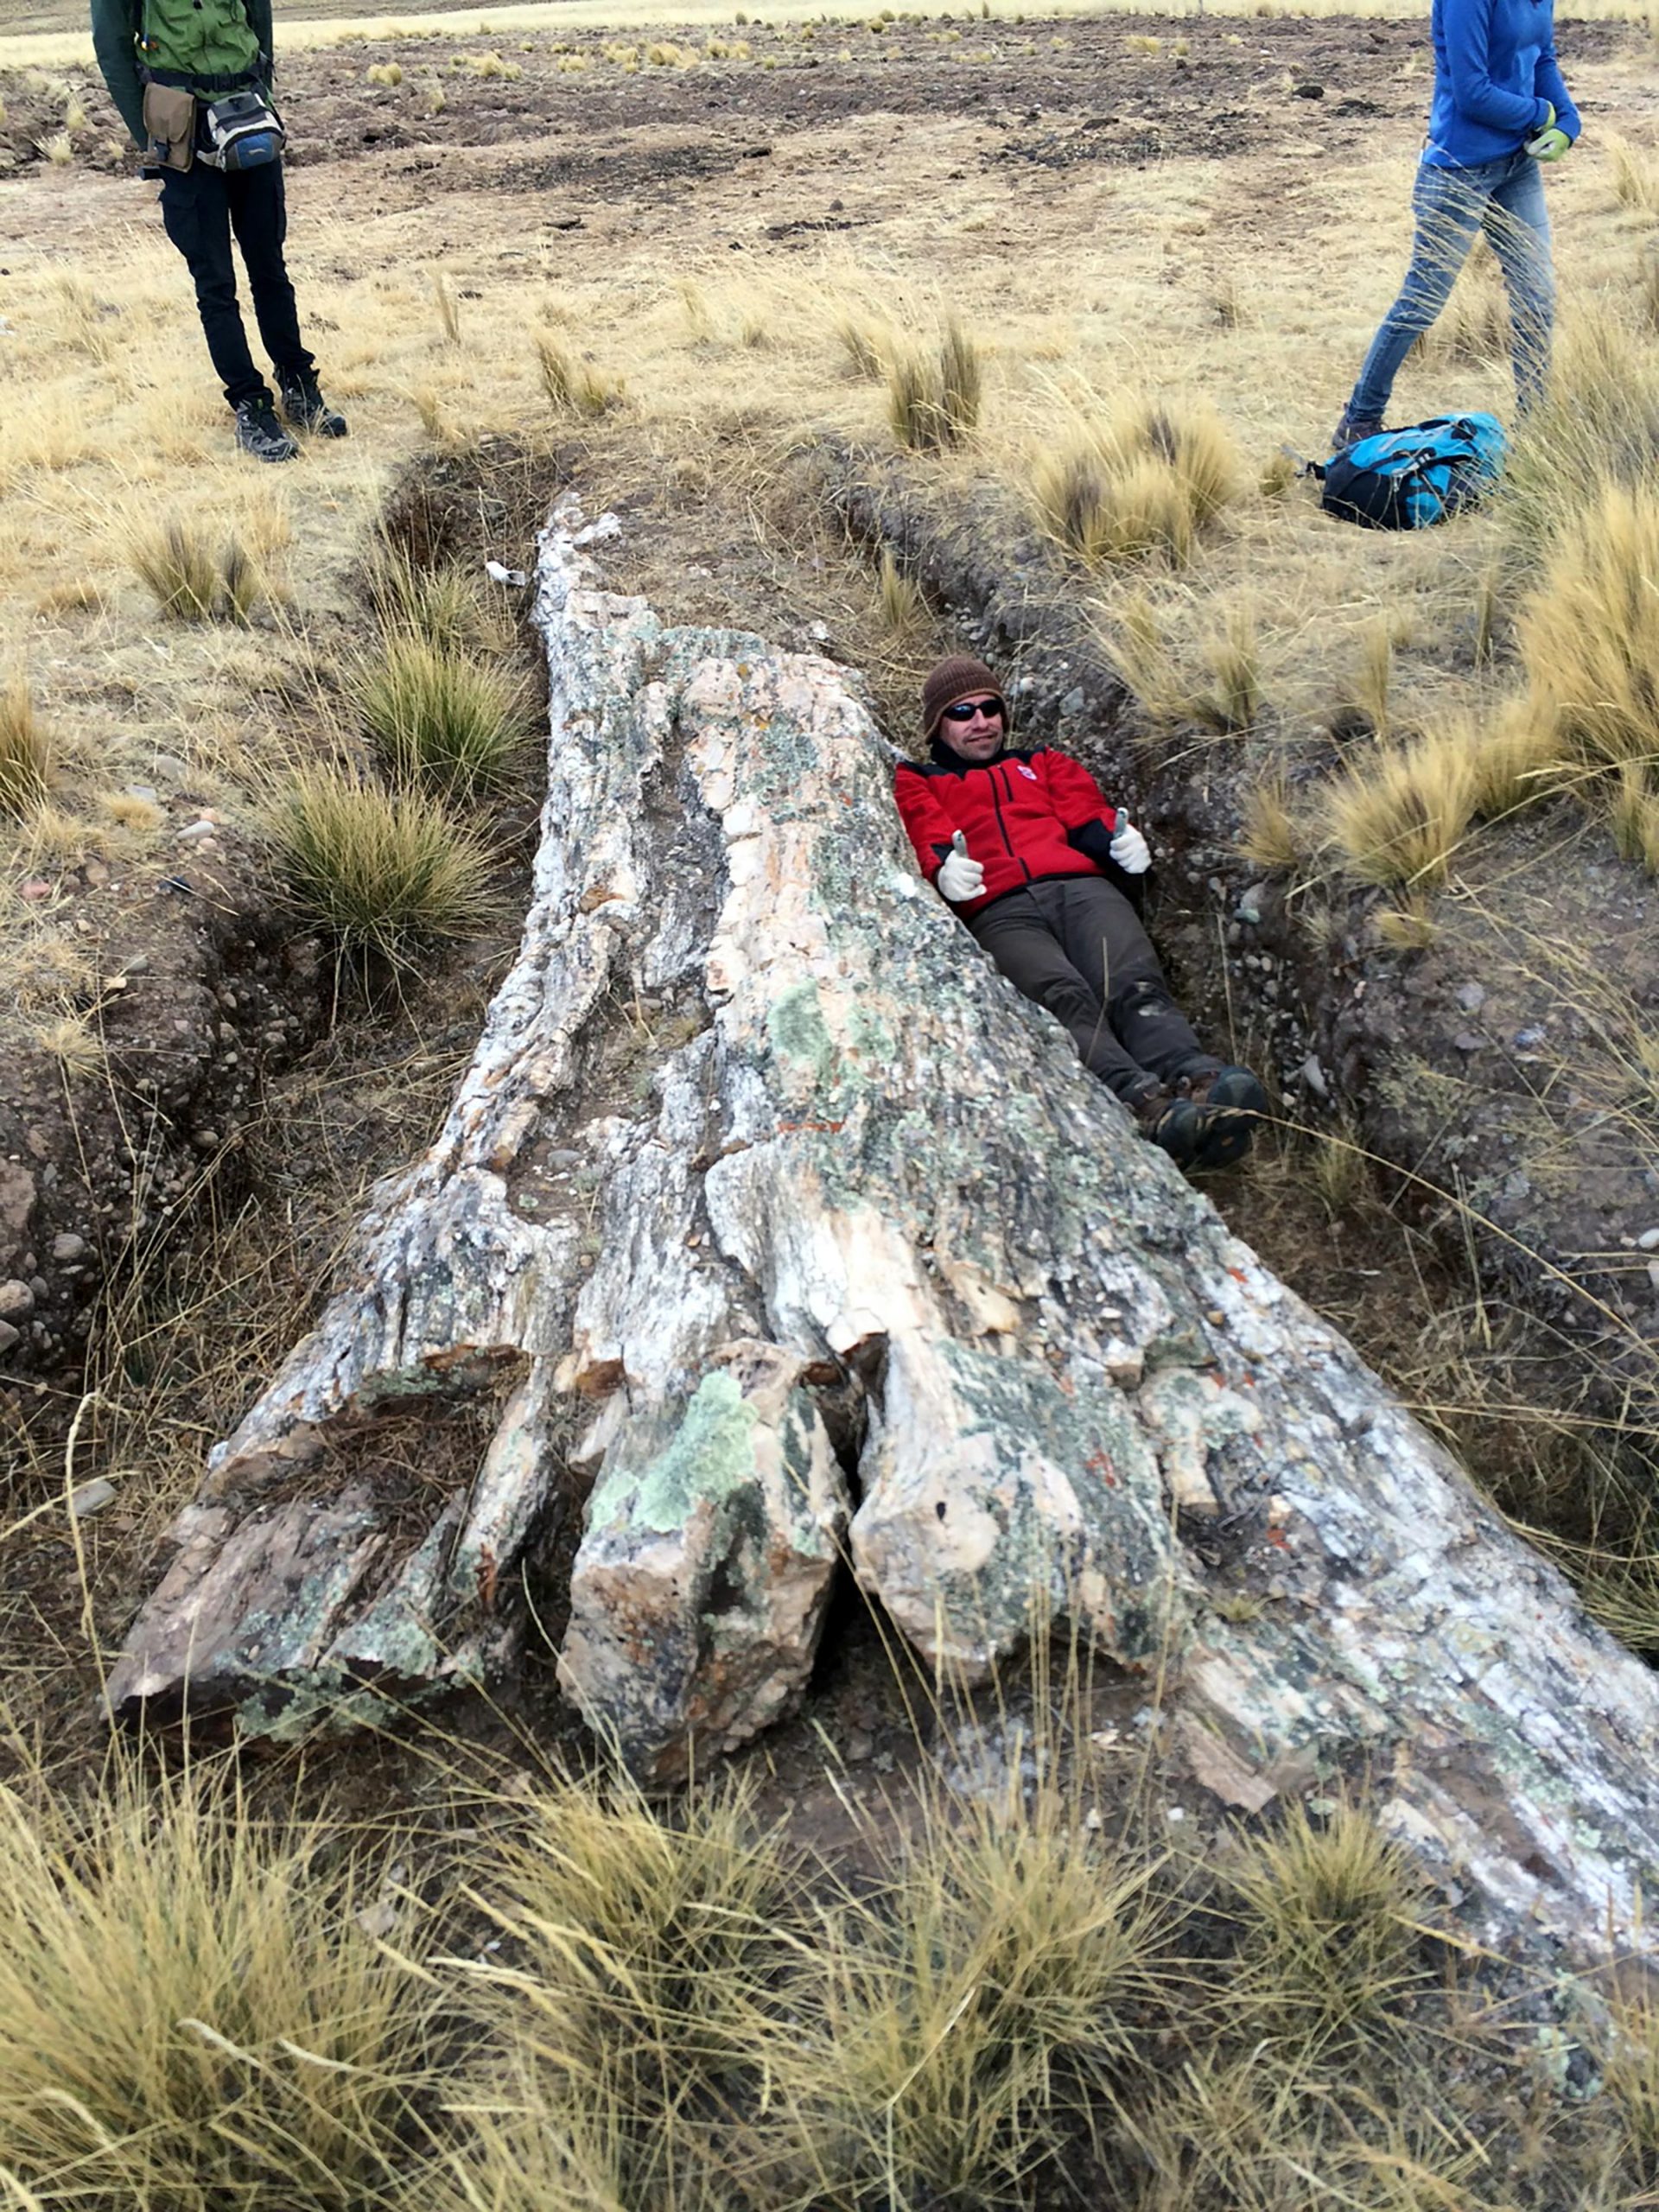 Spectacular Tale of Environmental Change Told by Historical Fossil Trees on Peru’s Central Andean Plateau